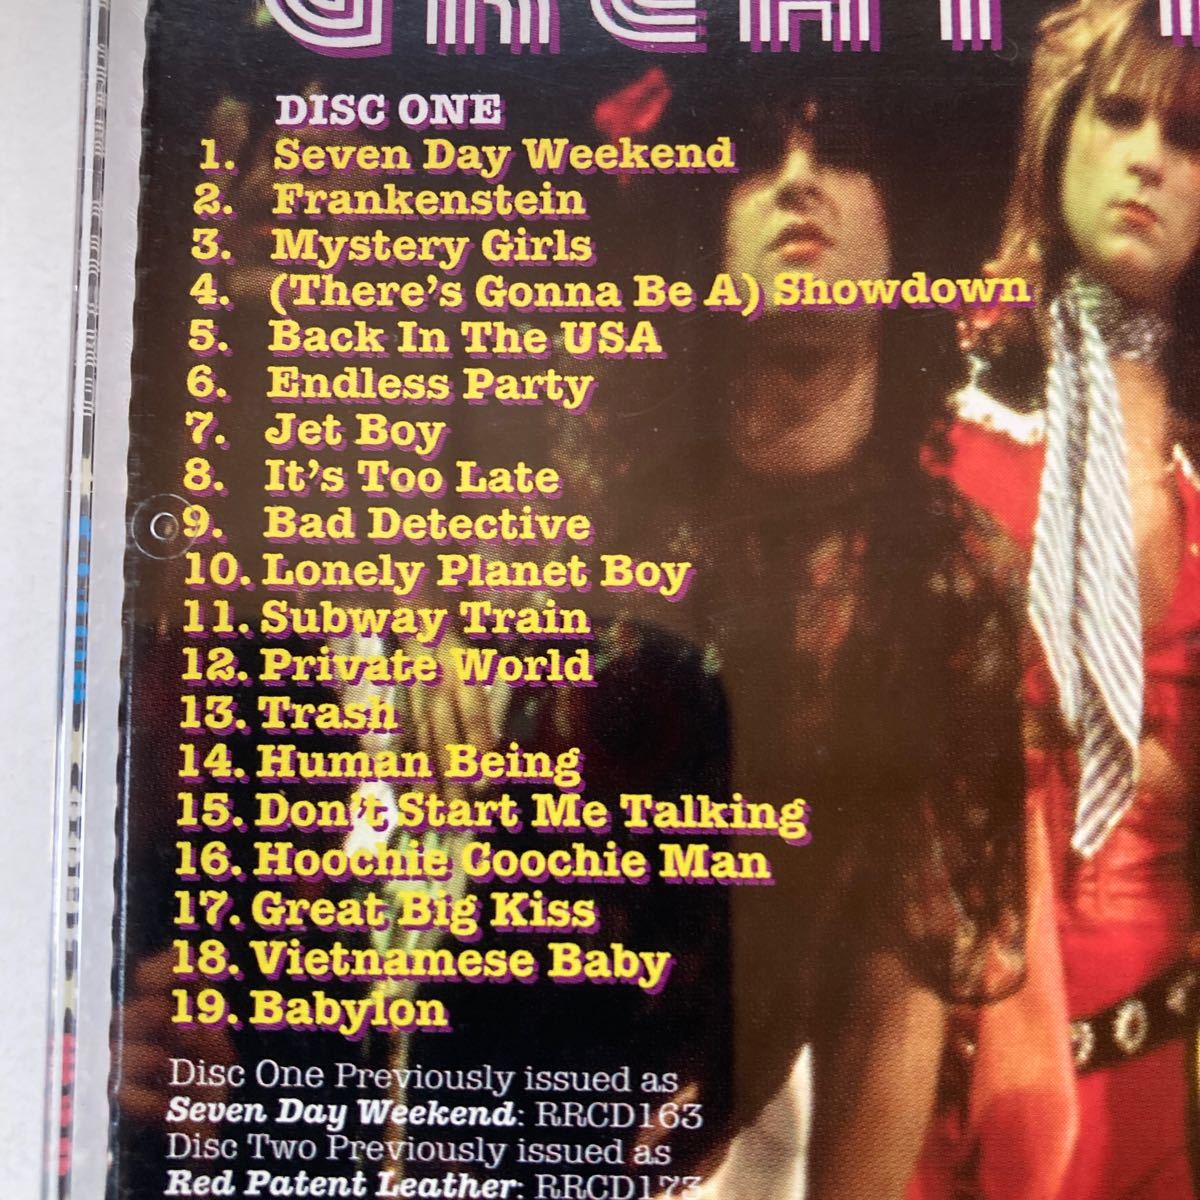 NEW YORK DOLLS ニューヨーク・ドールズ GREAT BIG KISS Seven Days Weekend Jet Boy Human Being Personality Crisis Looking For A Kiss_画像4